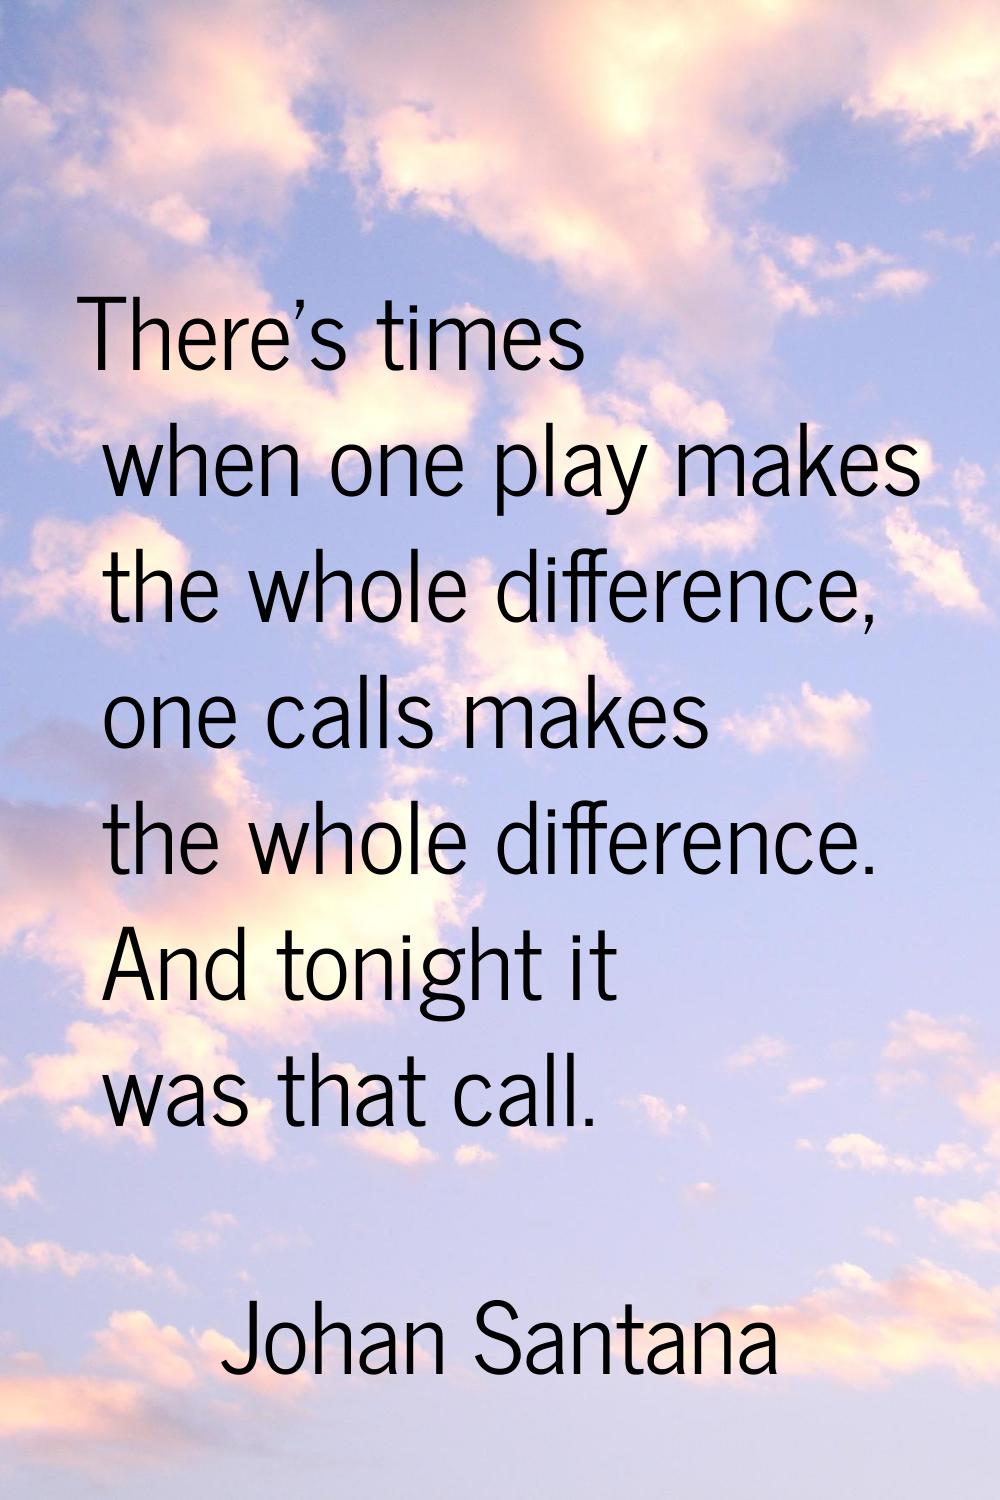 There's times when one play makes the whole difference, one calls makes the whole difference. And t